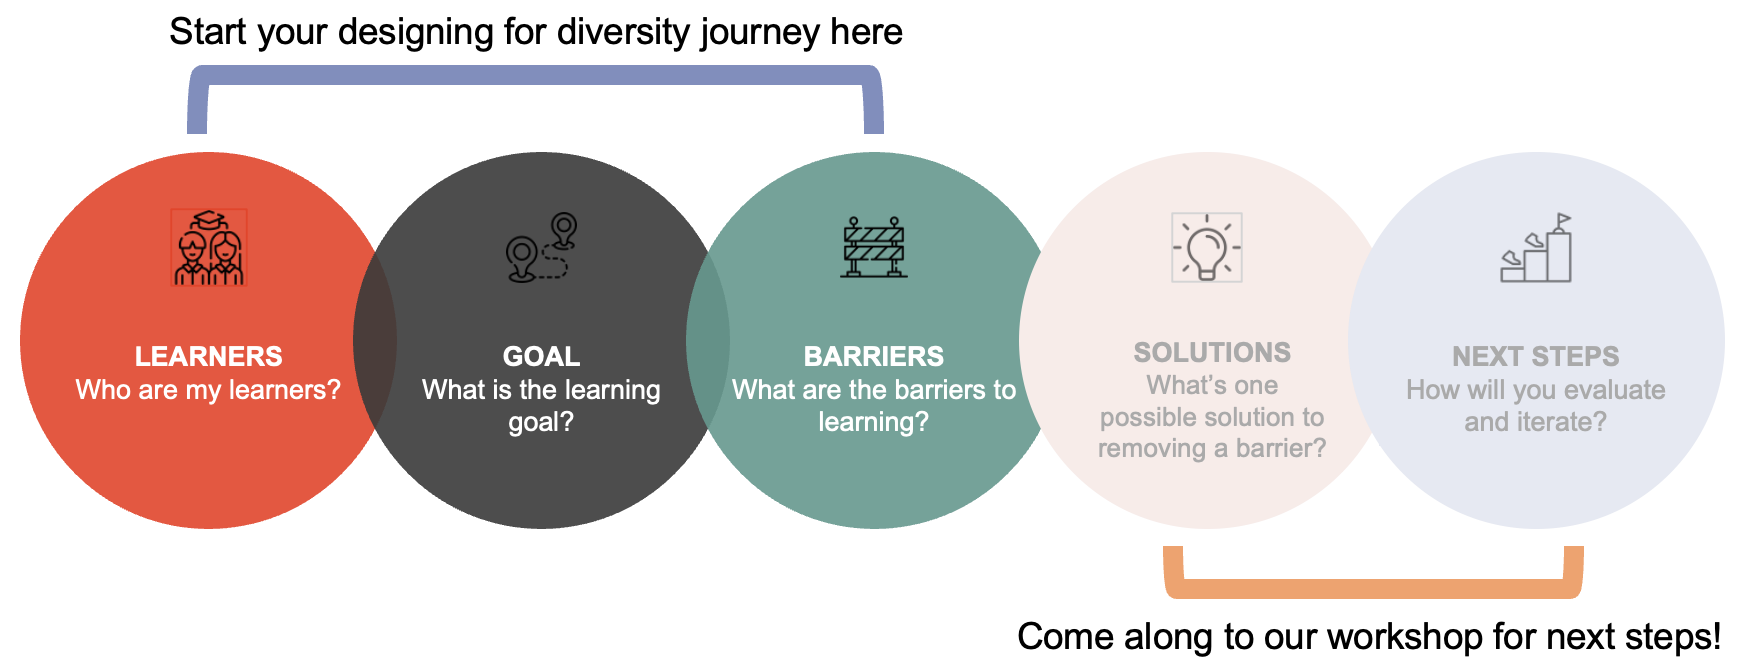 Start your designing for diversity journey here: Learners, who are my learners?; Goal, what is the learning goal?; Barriers, what are the barriers to learning?. Come along to our workshop for next steps: Solutions, what's one possible solution to removing barrier?; Next steps, how will you evaluate and iterate? 